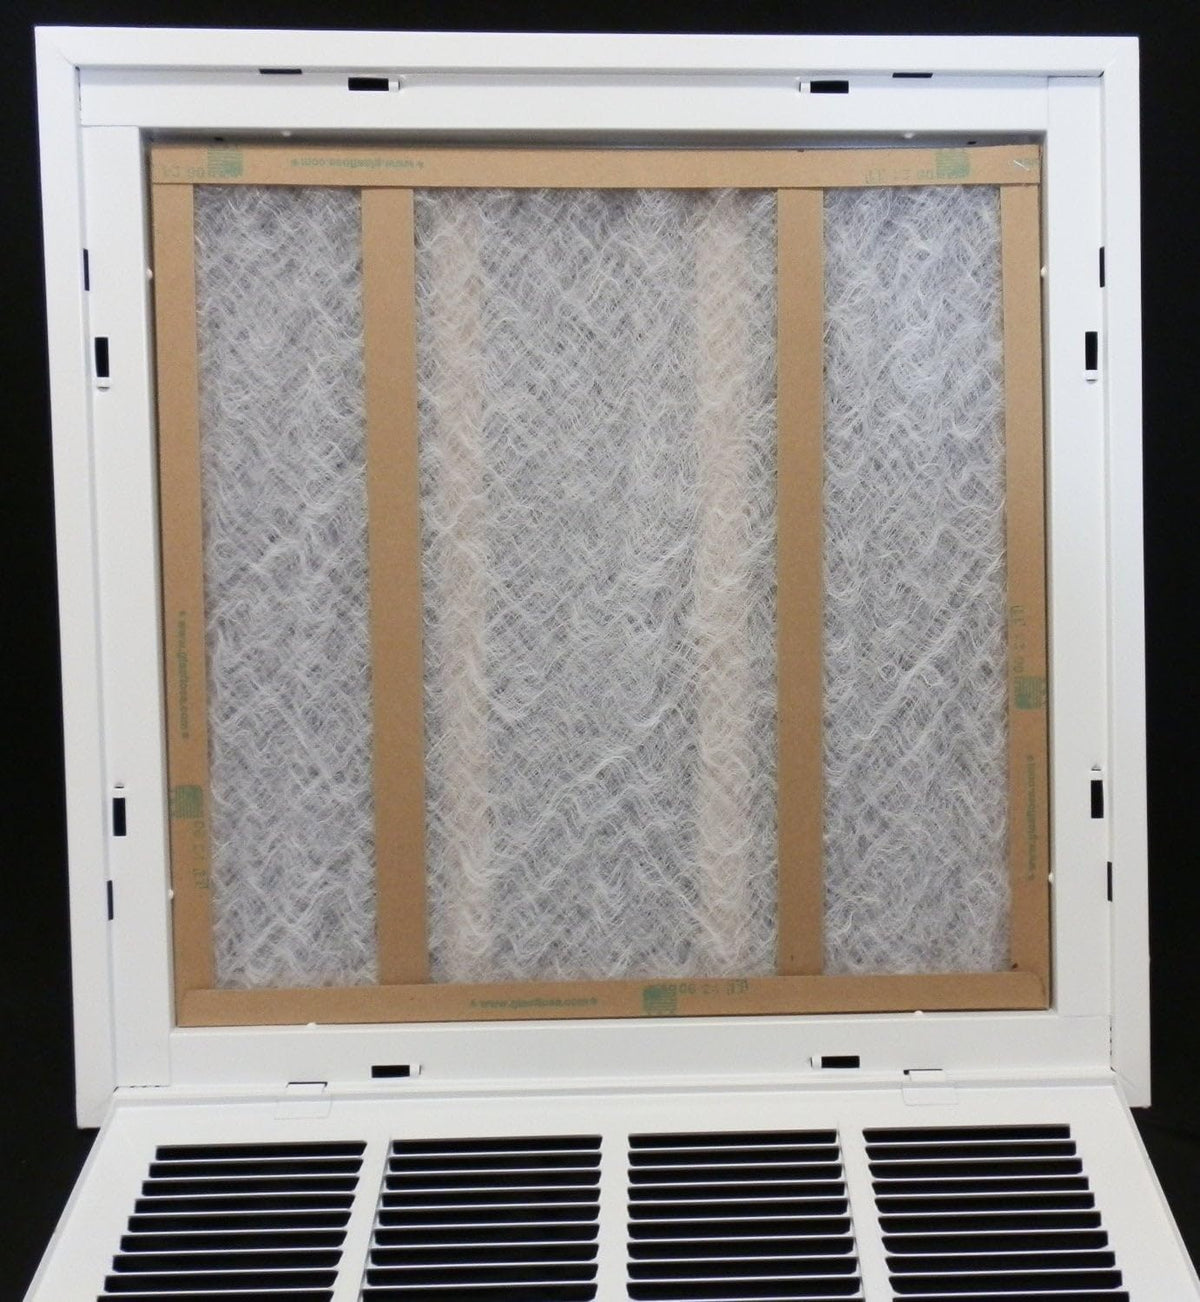 10&quot; X 24&quot; Steel Return Air Filter Grille for 1&quot; Filter - Fixed Hinged - [Outer Dimensions: 12 5/8&quot; X 26 5/8&quot;]